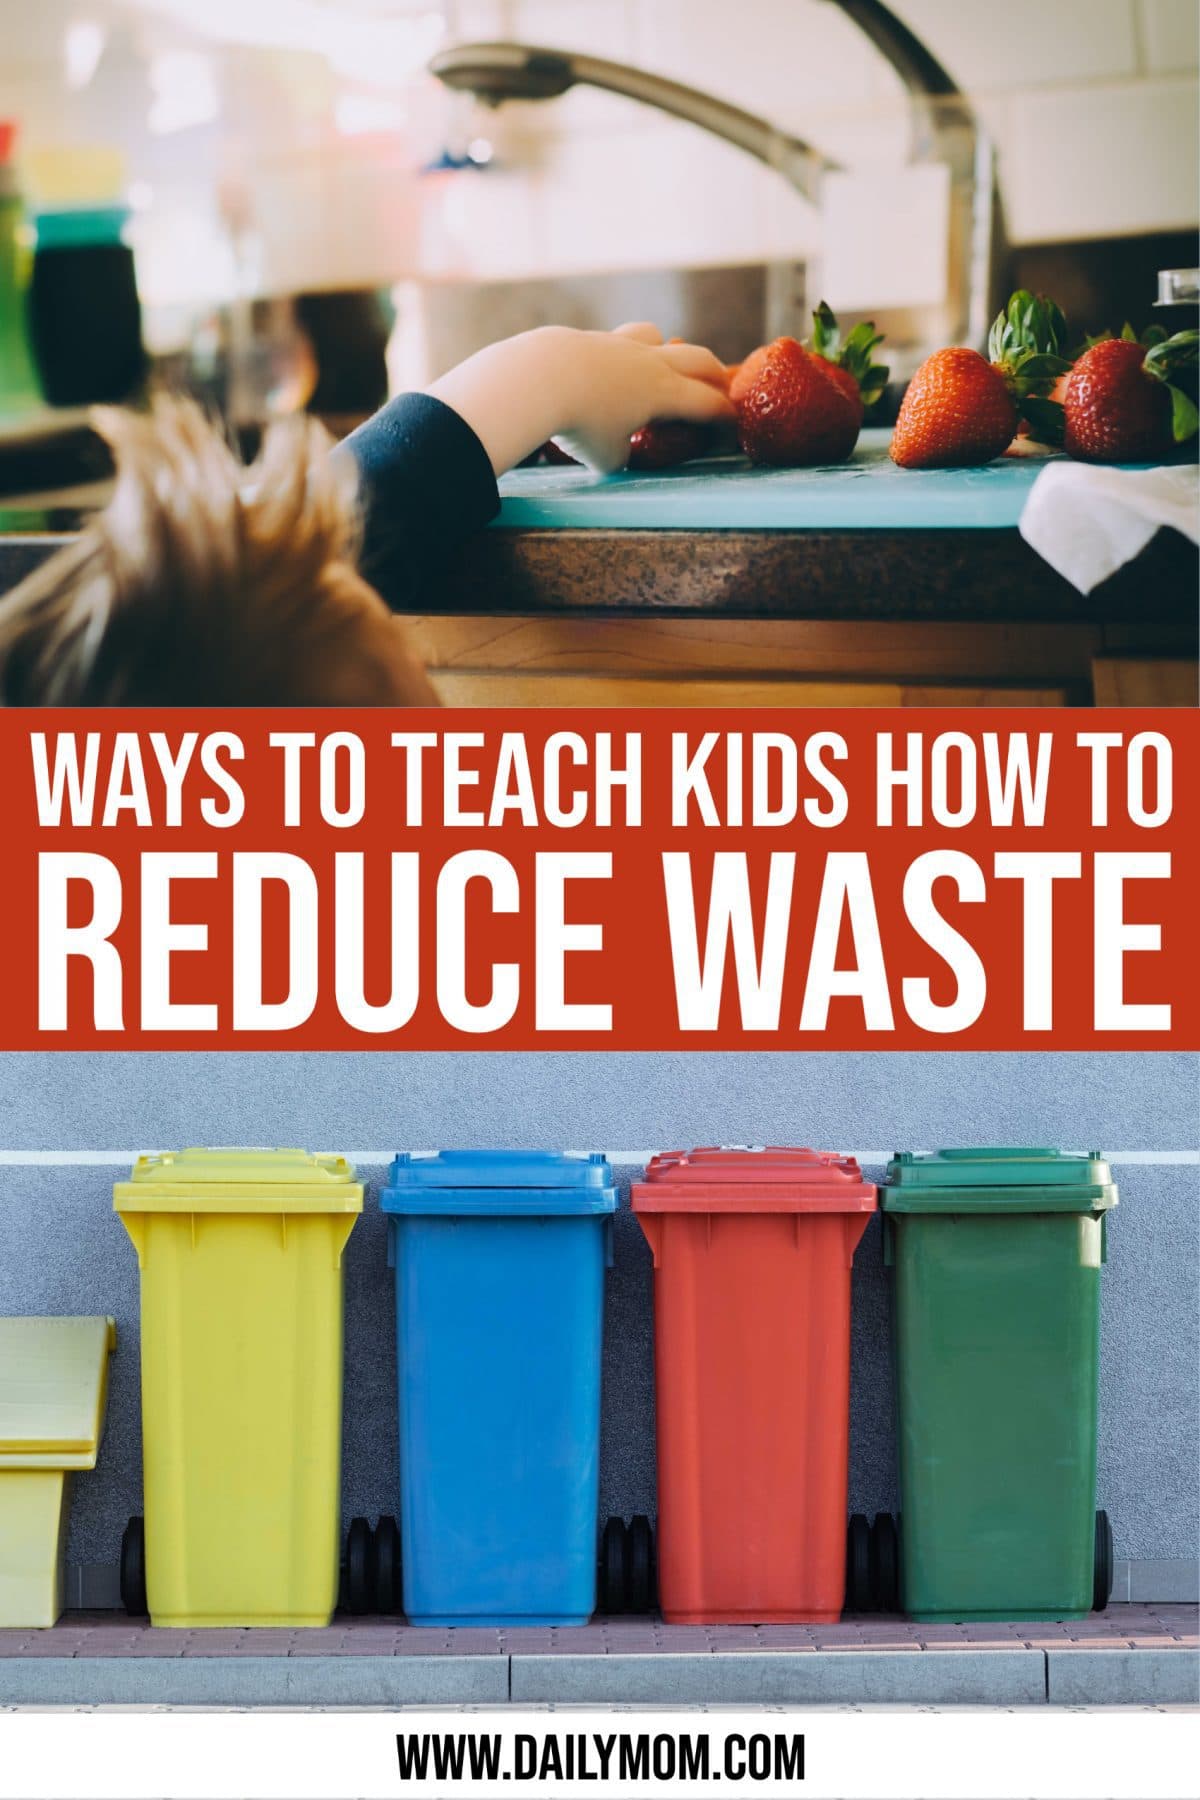 Reducing Waste: Simple Practices To Teach Kids Today